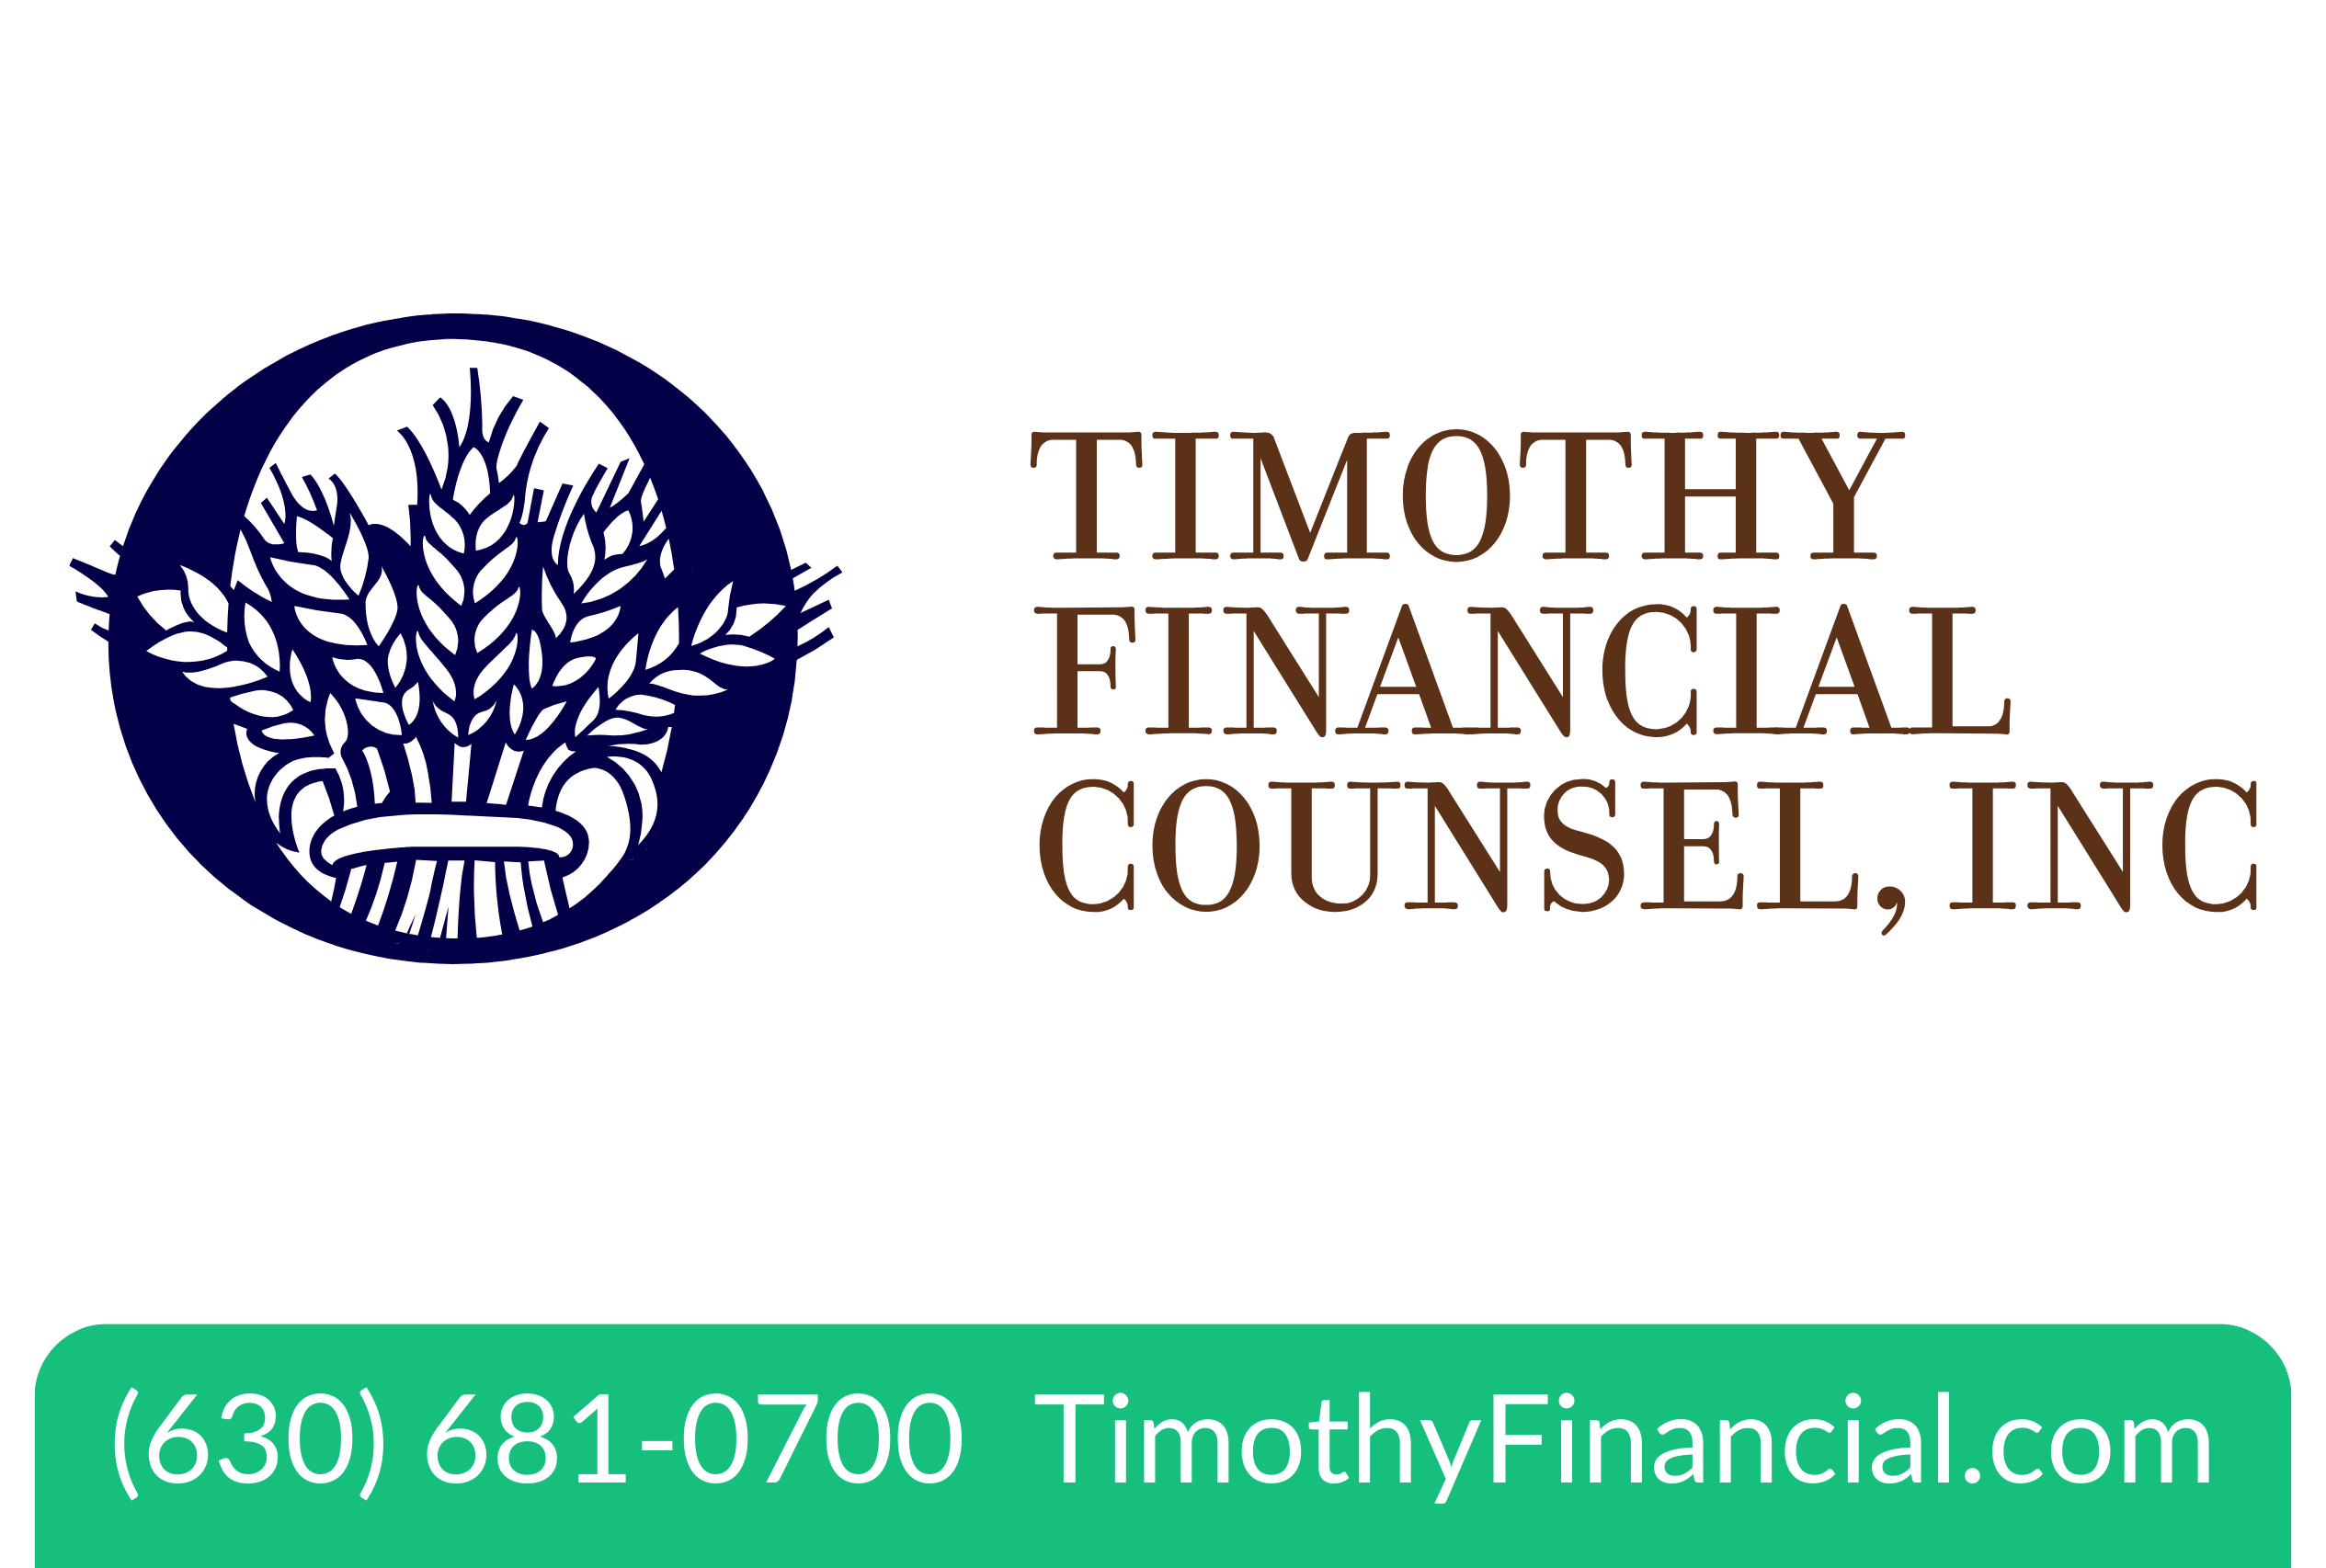 Wheaton Sport Center C2 Partner - Timothy Financial Counsel, Inc. Timothy Financial Counsel has always been a fee-only fiduciary financial planning firm. Like other fee-only firms, we don’t receive commissions based on our recommendations. Unlike other fee-only firms, our fees are not tied to the size of your investment portfolio. We simply charge for our time by the hour. You only pay for the time you need. You also receive an upfront quote on your initial financial plan — so there are no surprises.